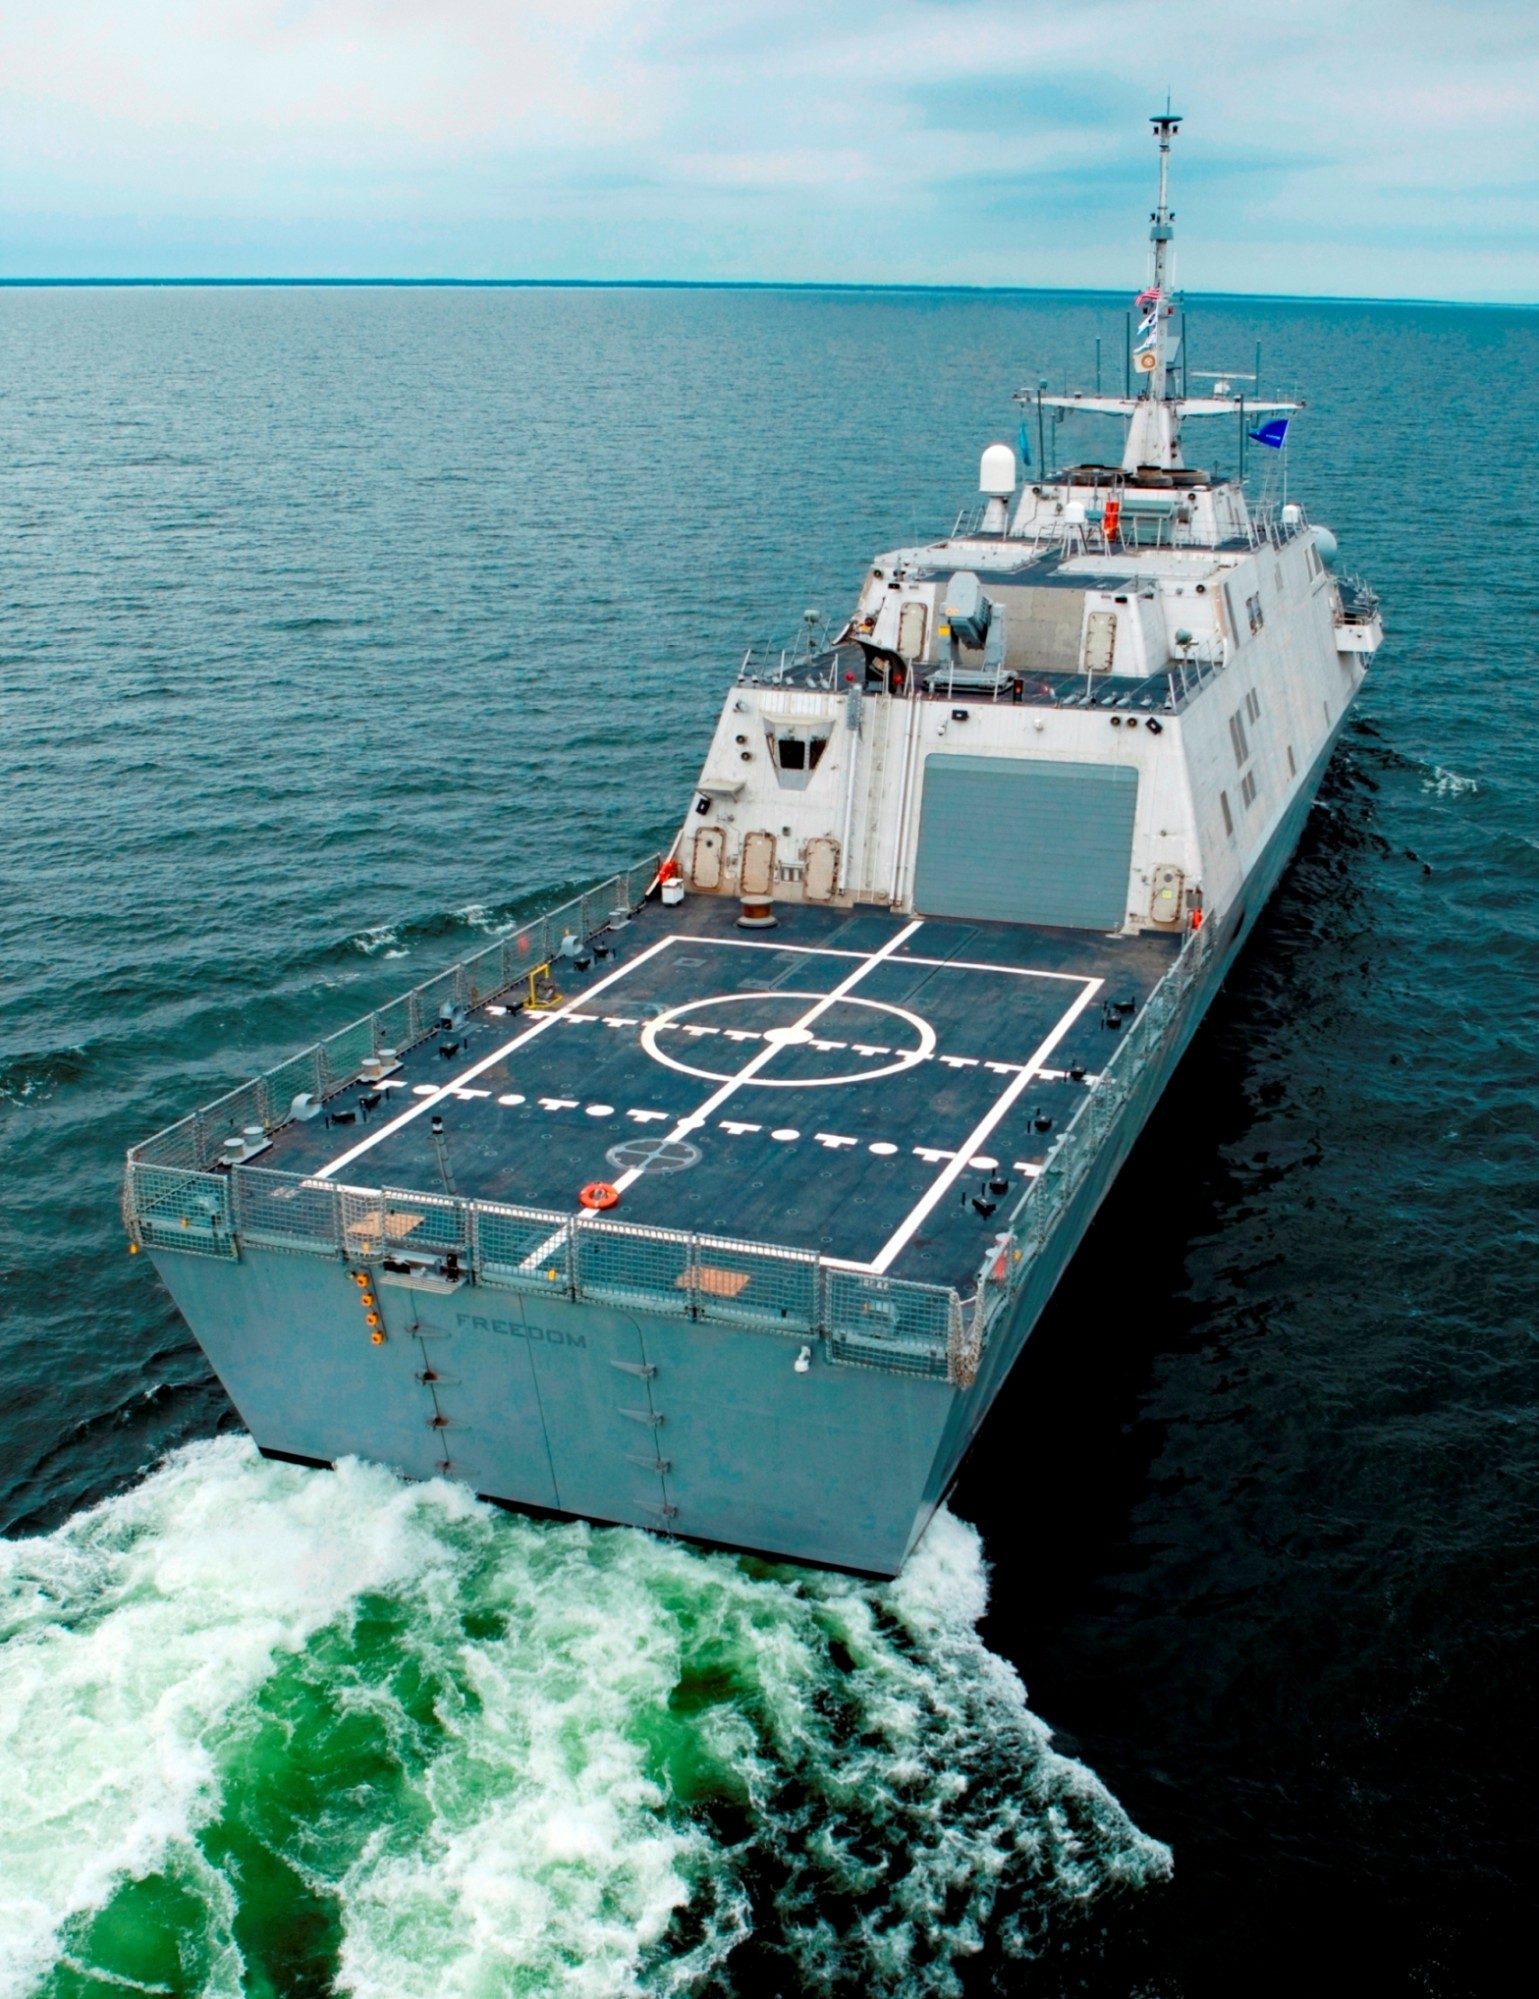 US Navy LCS 1 Freedom